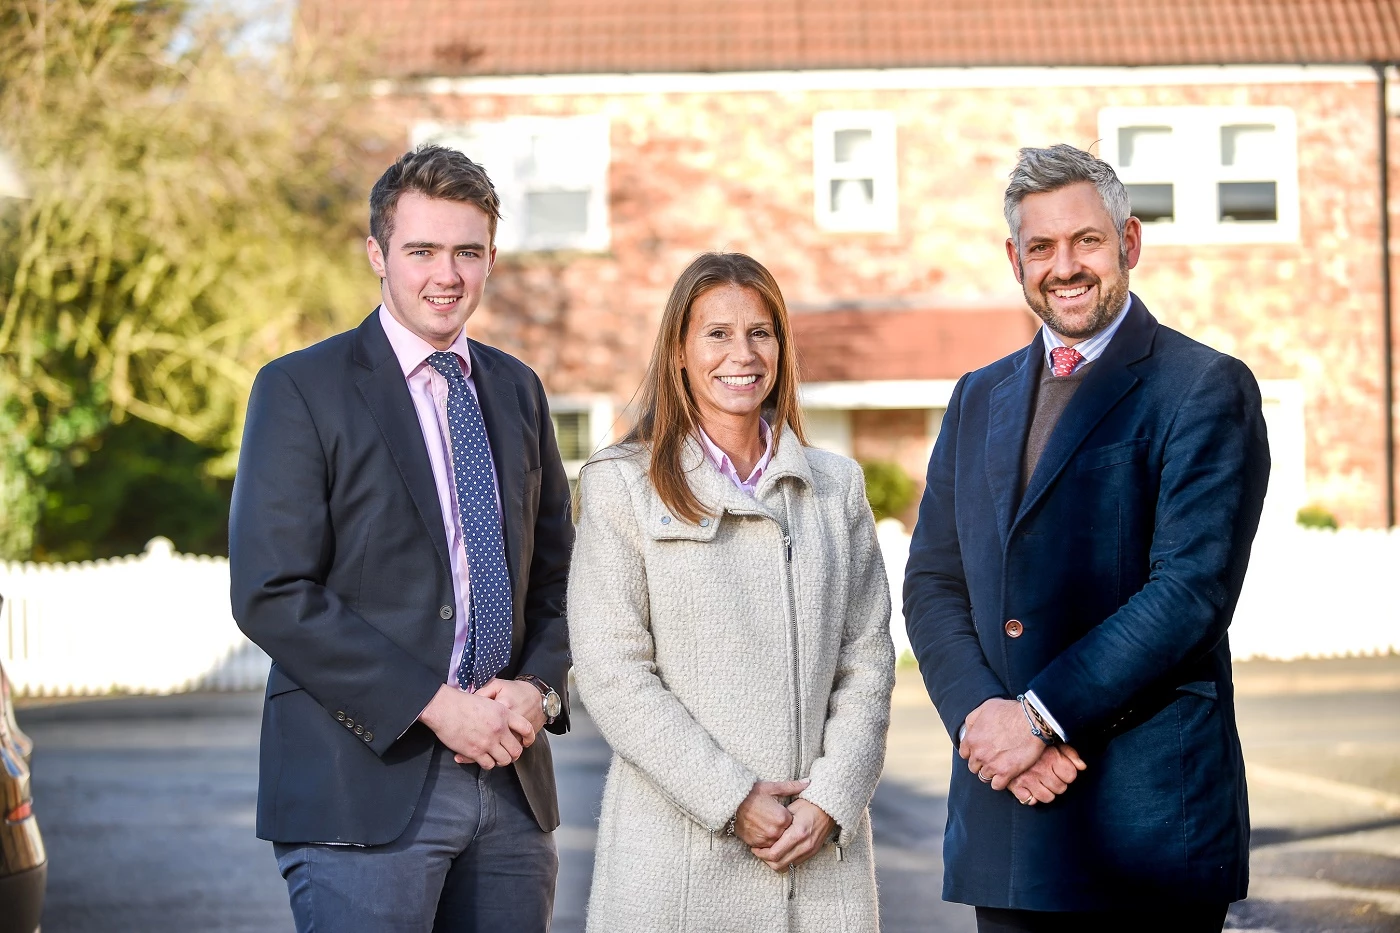 From left: Charlie Elliott, Sarah Weston and Toby Cockcroft, Croft Residential